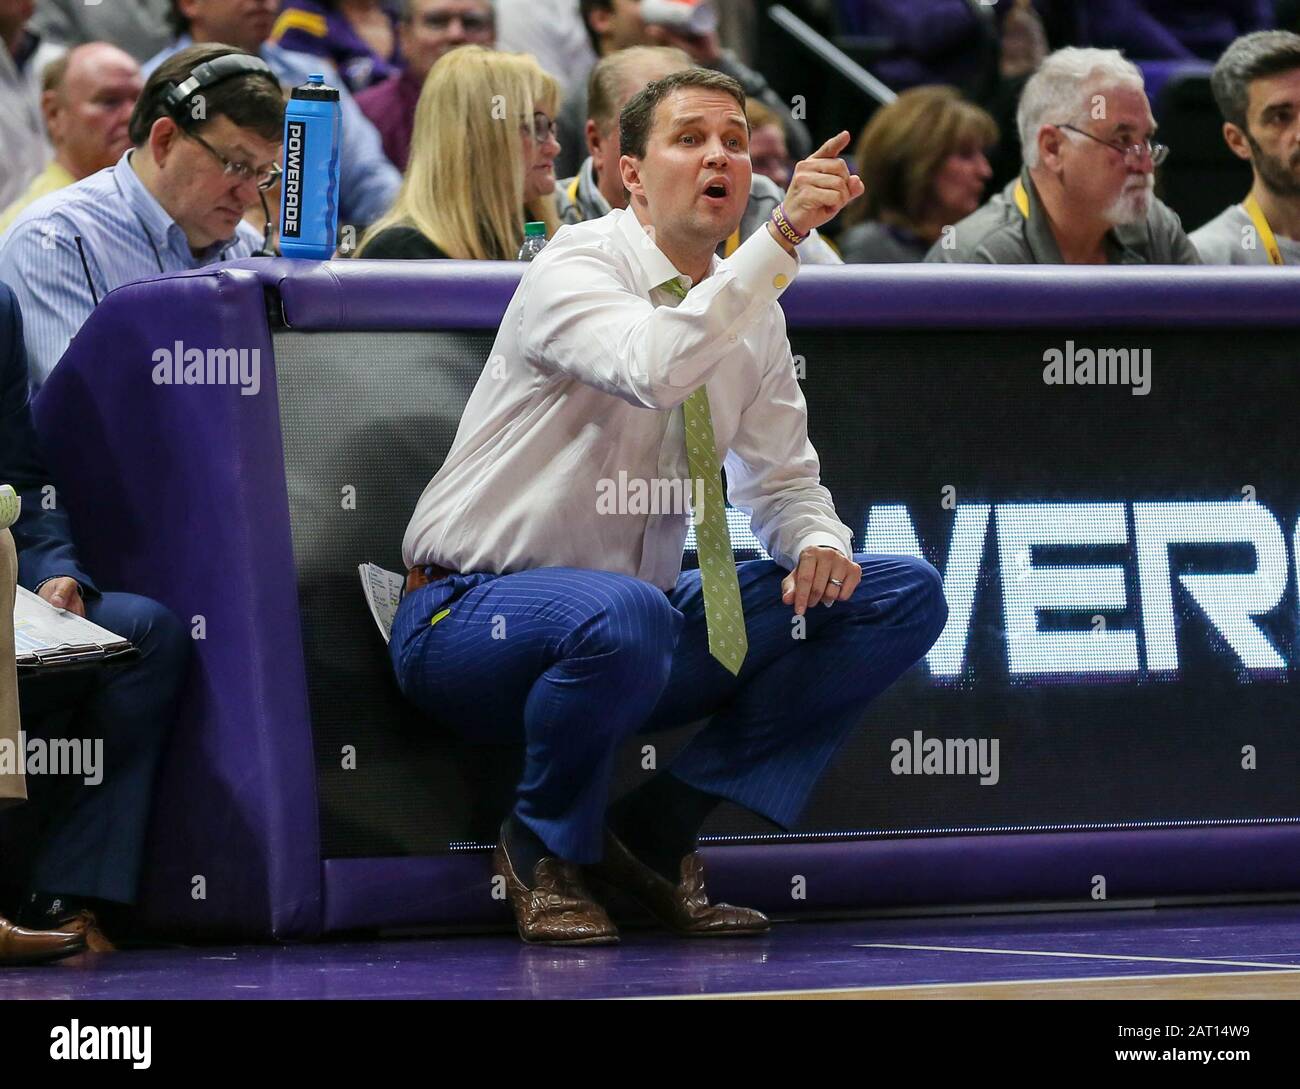 Baton Rouge, LA, USA. 29th Jan, 2020. LSU Head Coach Will Wade calls a play from the bench during NCAA Basketball action between the Alabama Crimson Tide and the LSU Tigers at the Pete Maravich Assembly Center in Baton Rouge, LA. Jonathan Mailhes/CSM/Alamy Live News Stock Photo